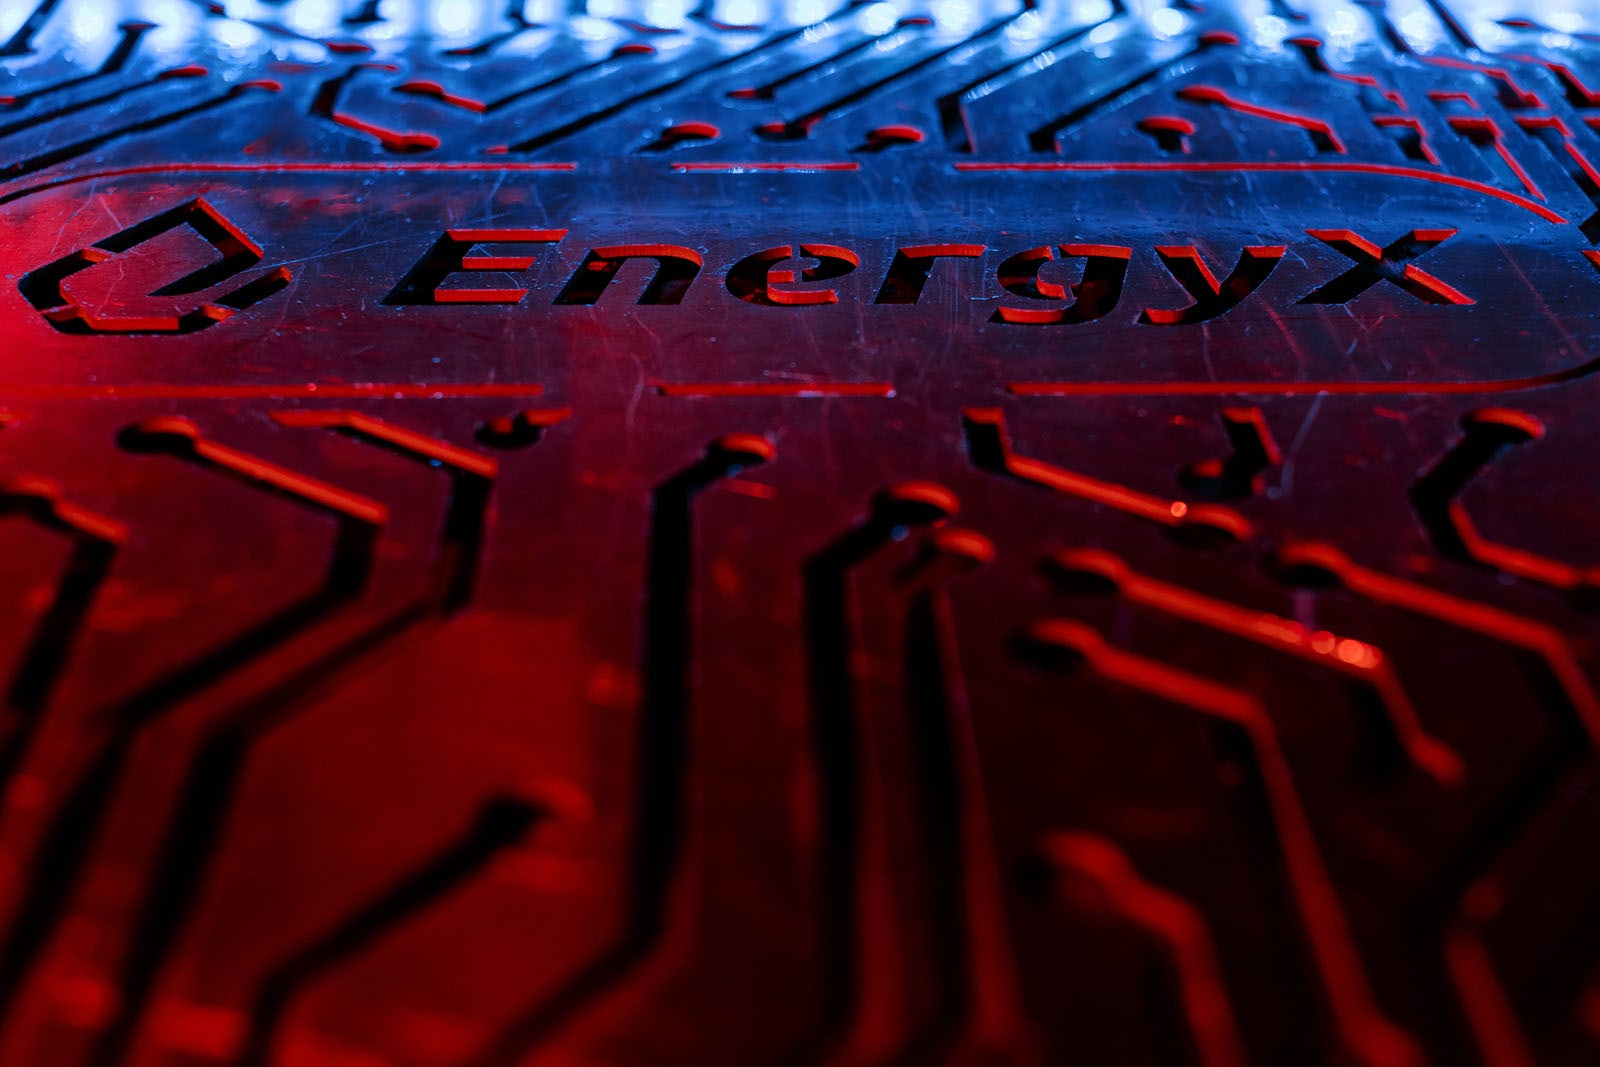 Alloy plate with circuitry design and EnergyX logo laser etched